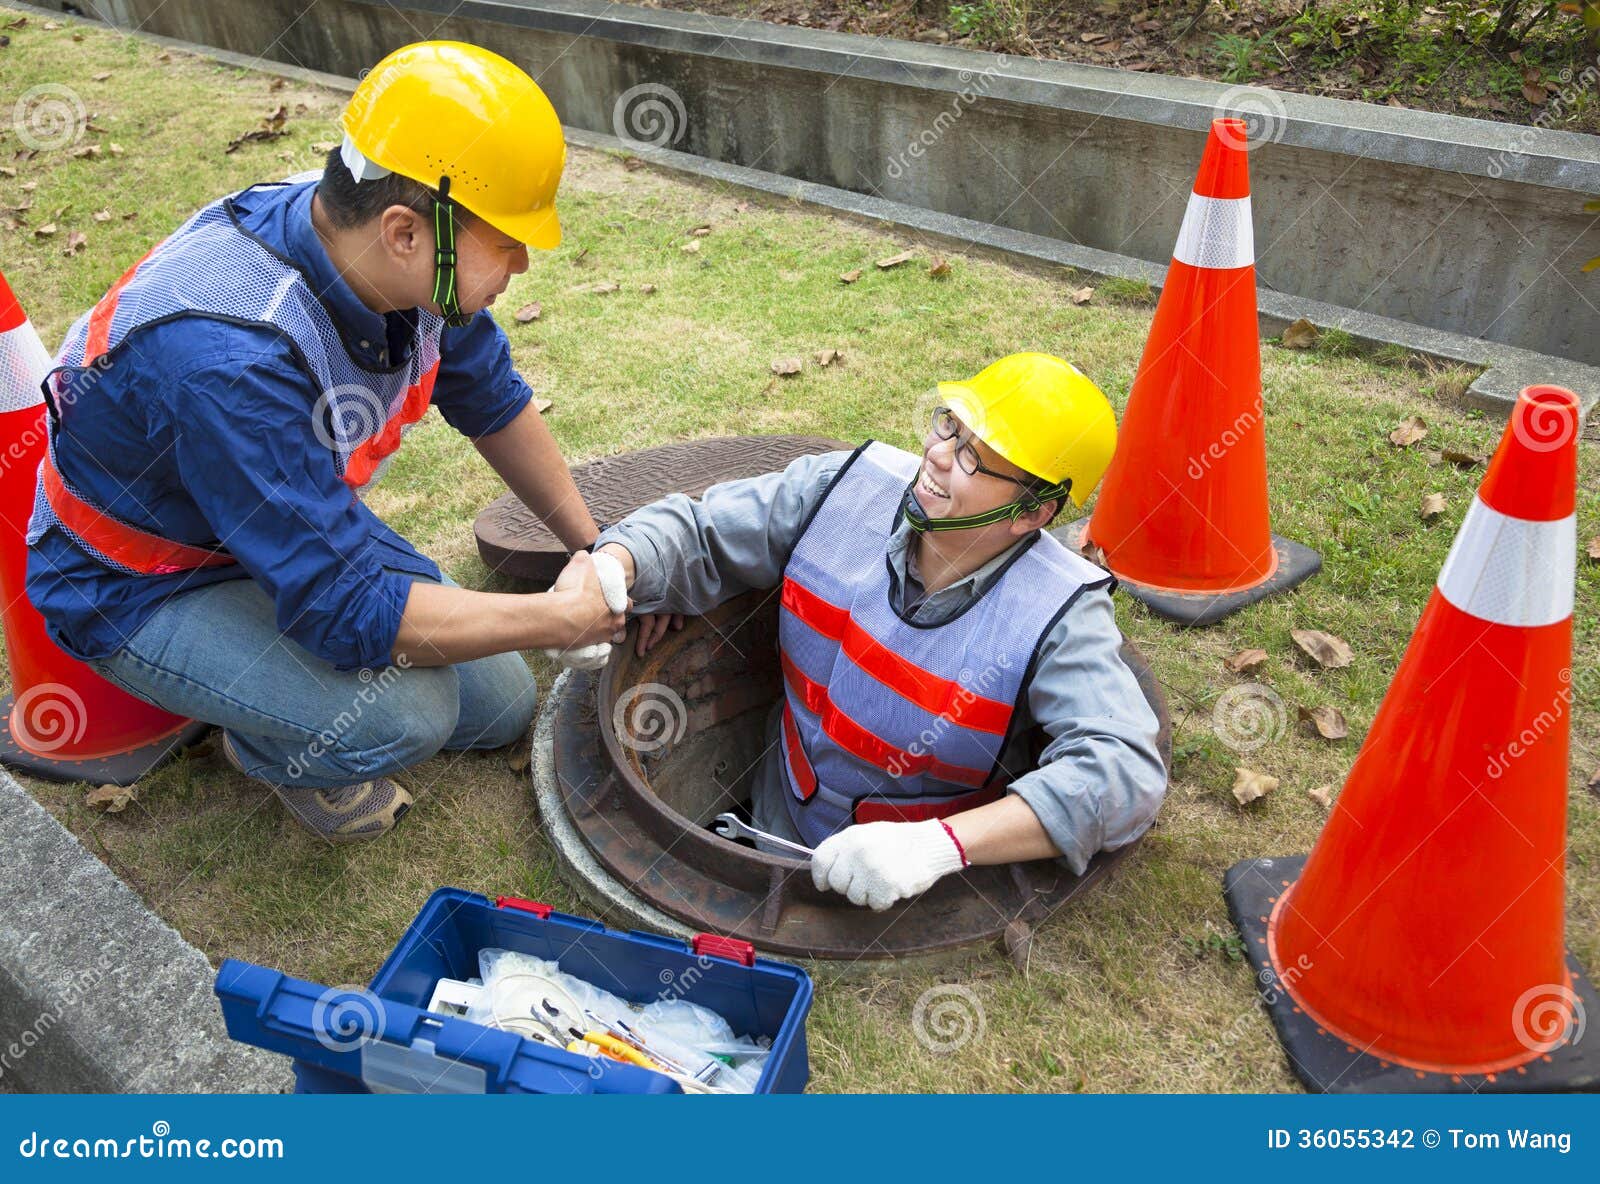 sewerage workers in the manhole